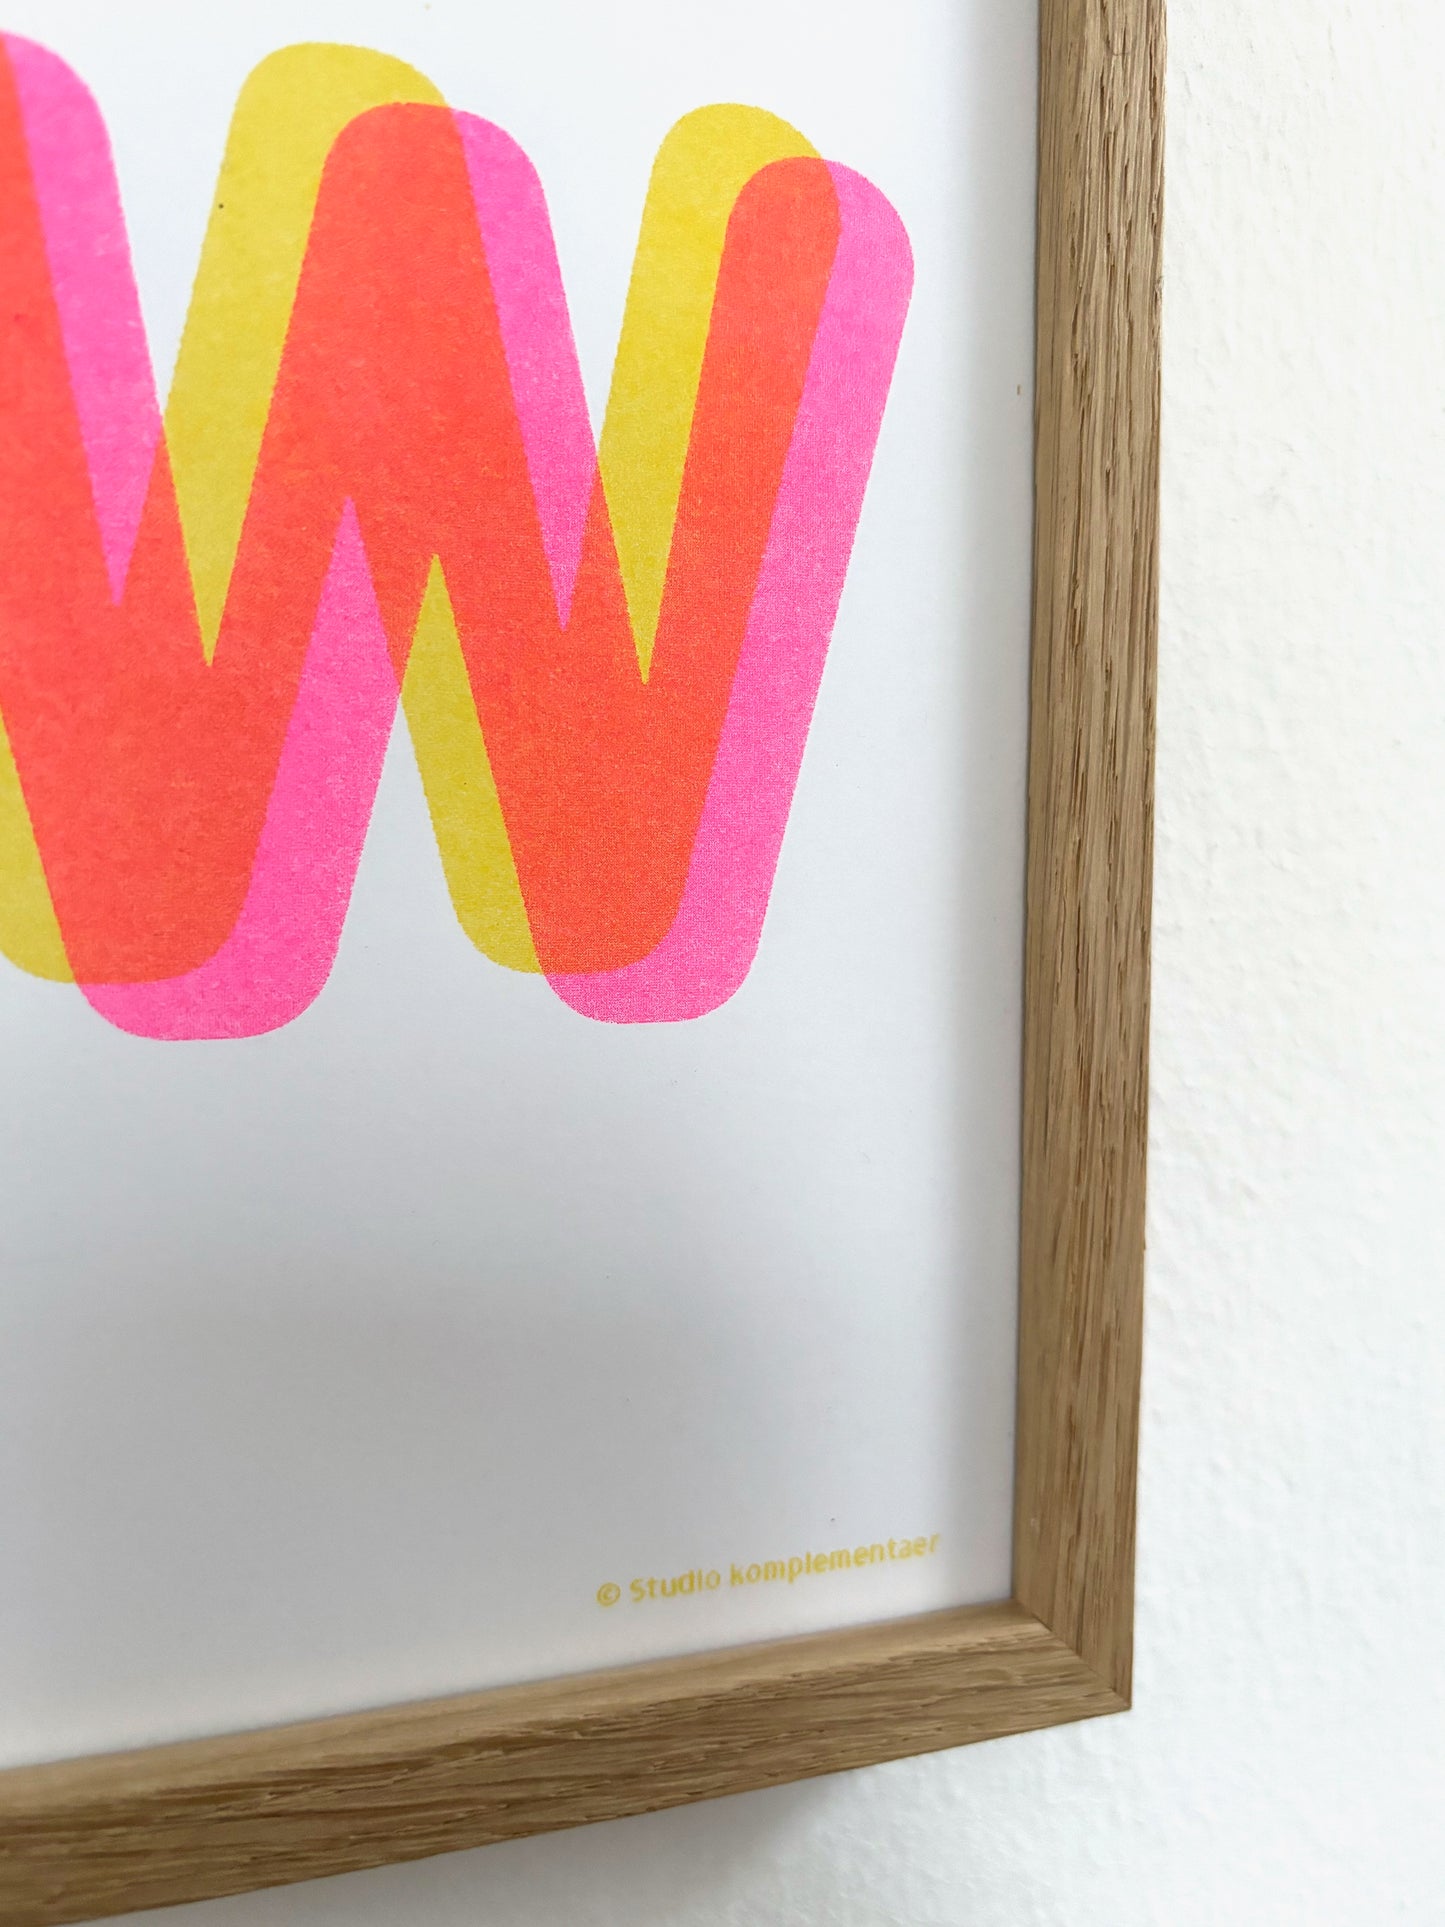 NOW WOW Plakat | Risographie